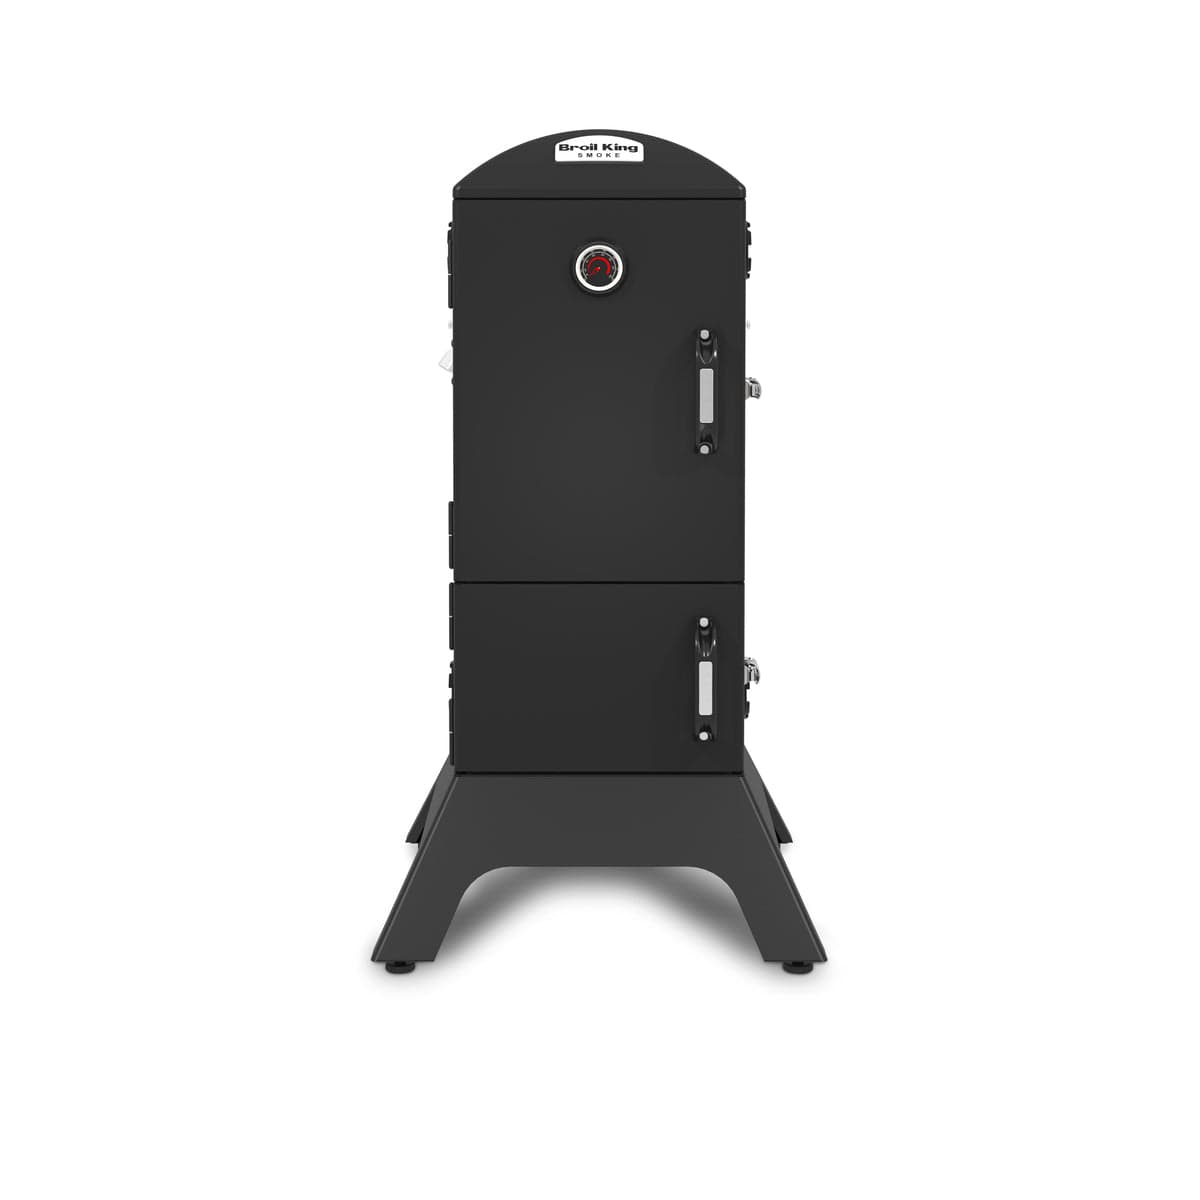 Broil King Broil King Smoke Vertical Charcoal Smoker 923610 Barbecue Finished - Charcoal 062703236100